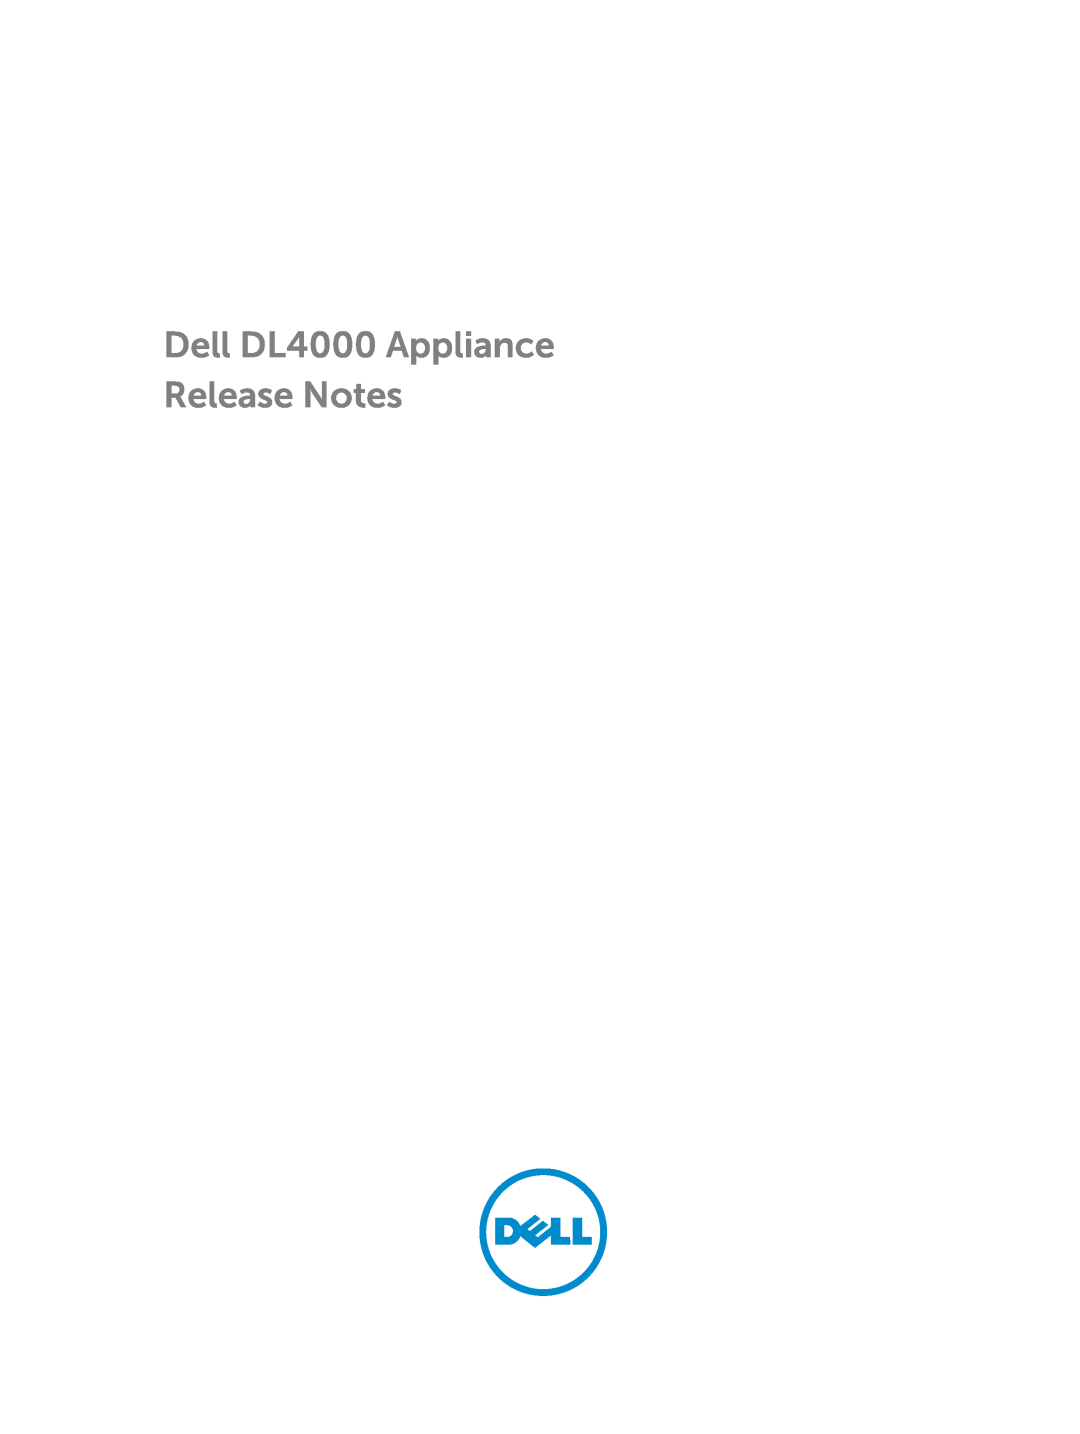 Dell manual Dell DL4000 Appliance Release Notes 